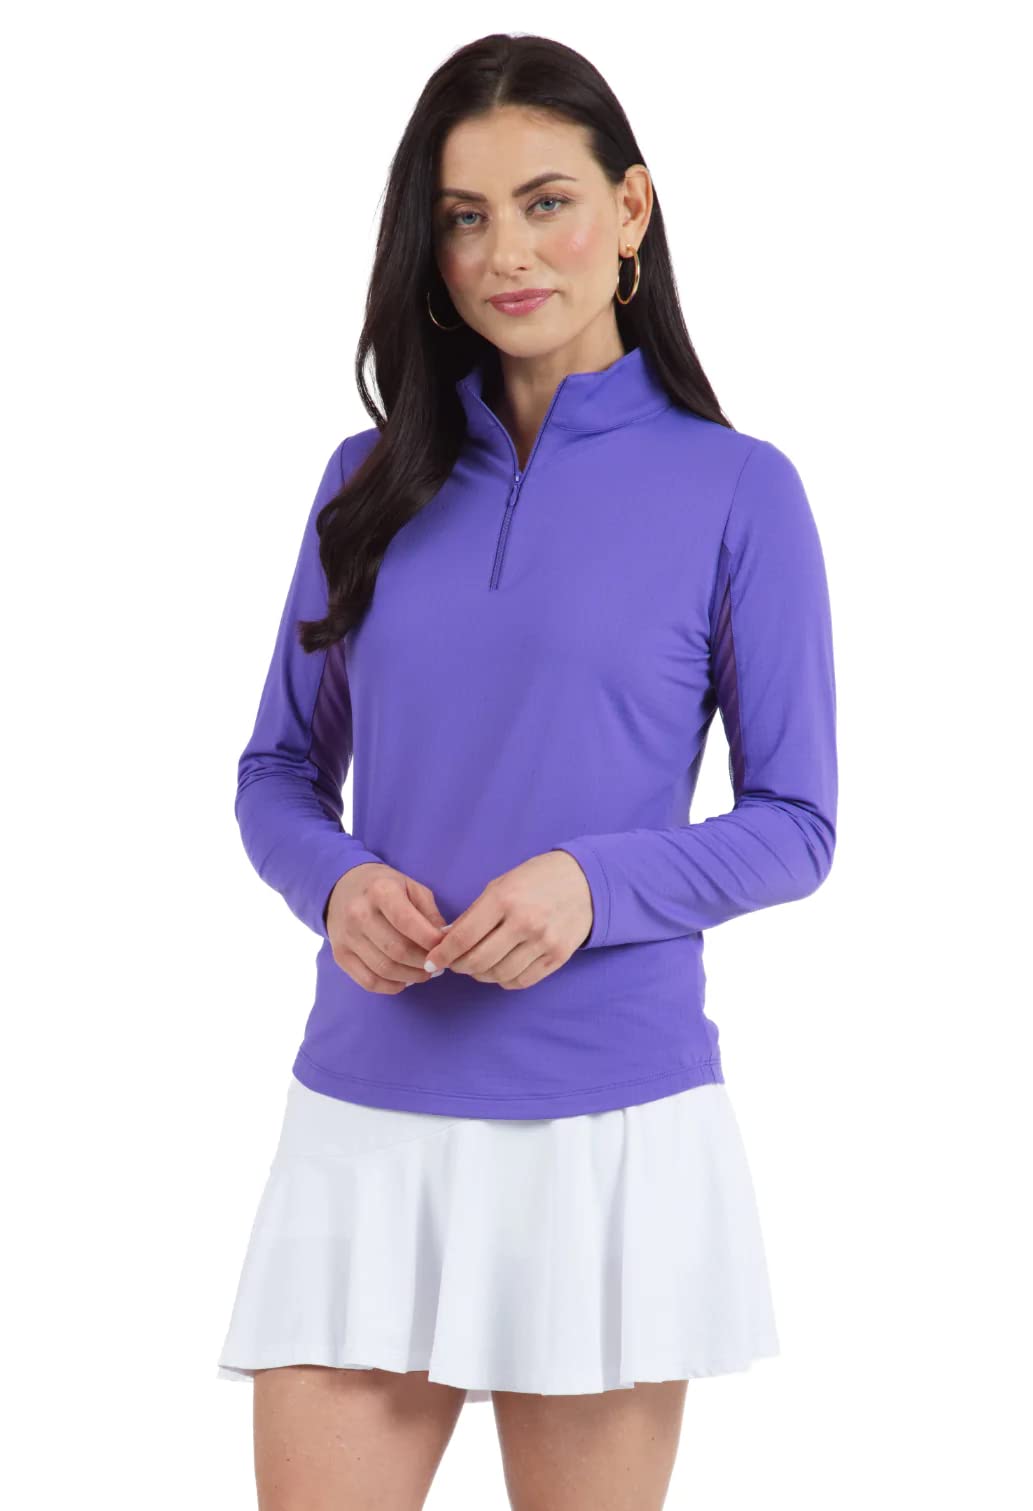 IBKUL Athleisure Wear Sun Protective UPF 50+ Icefil Cooling Tech Long Sleeve Mock Neck Top with Under Arm Mesh 80000 Plum Solid L